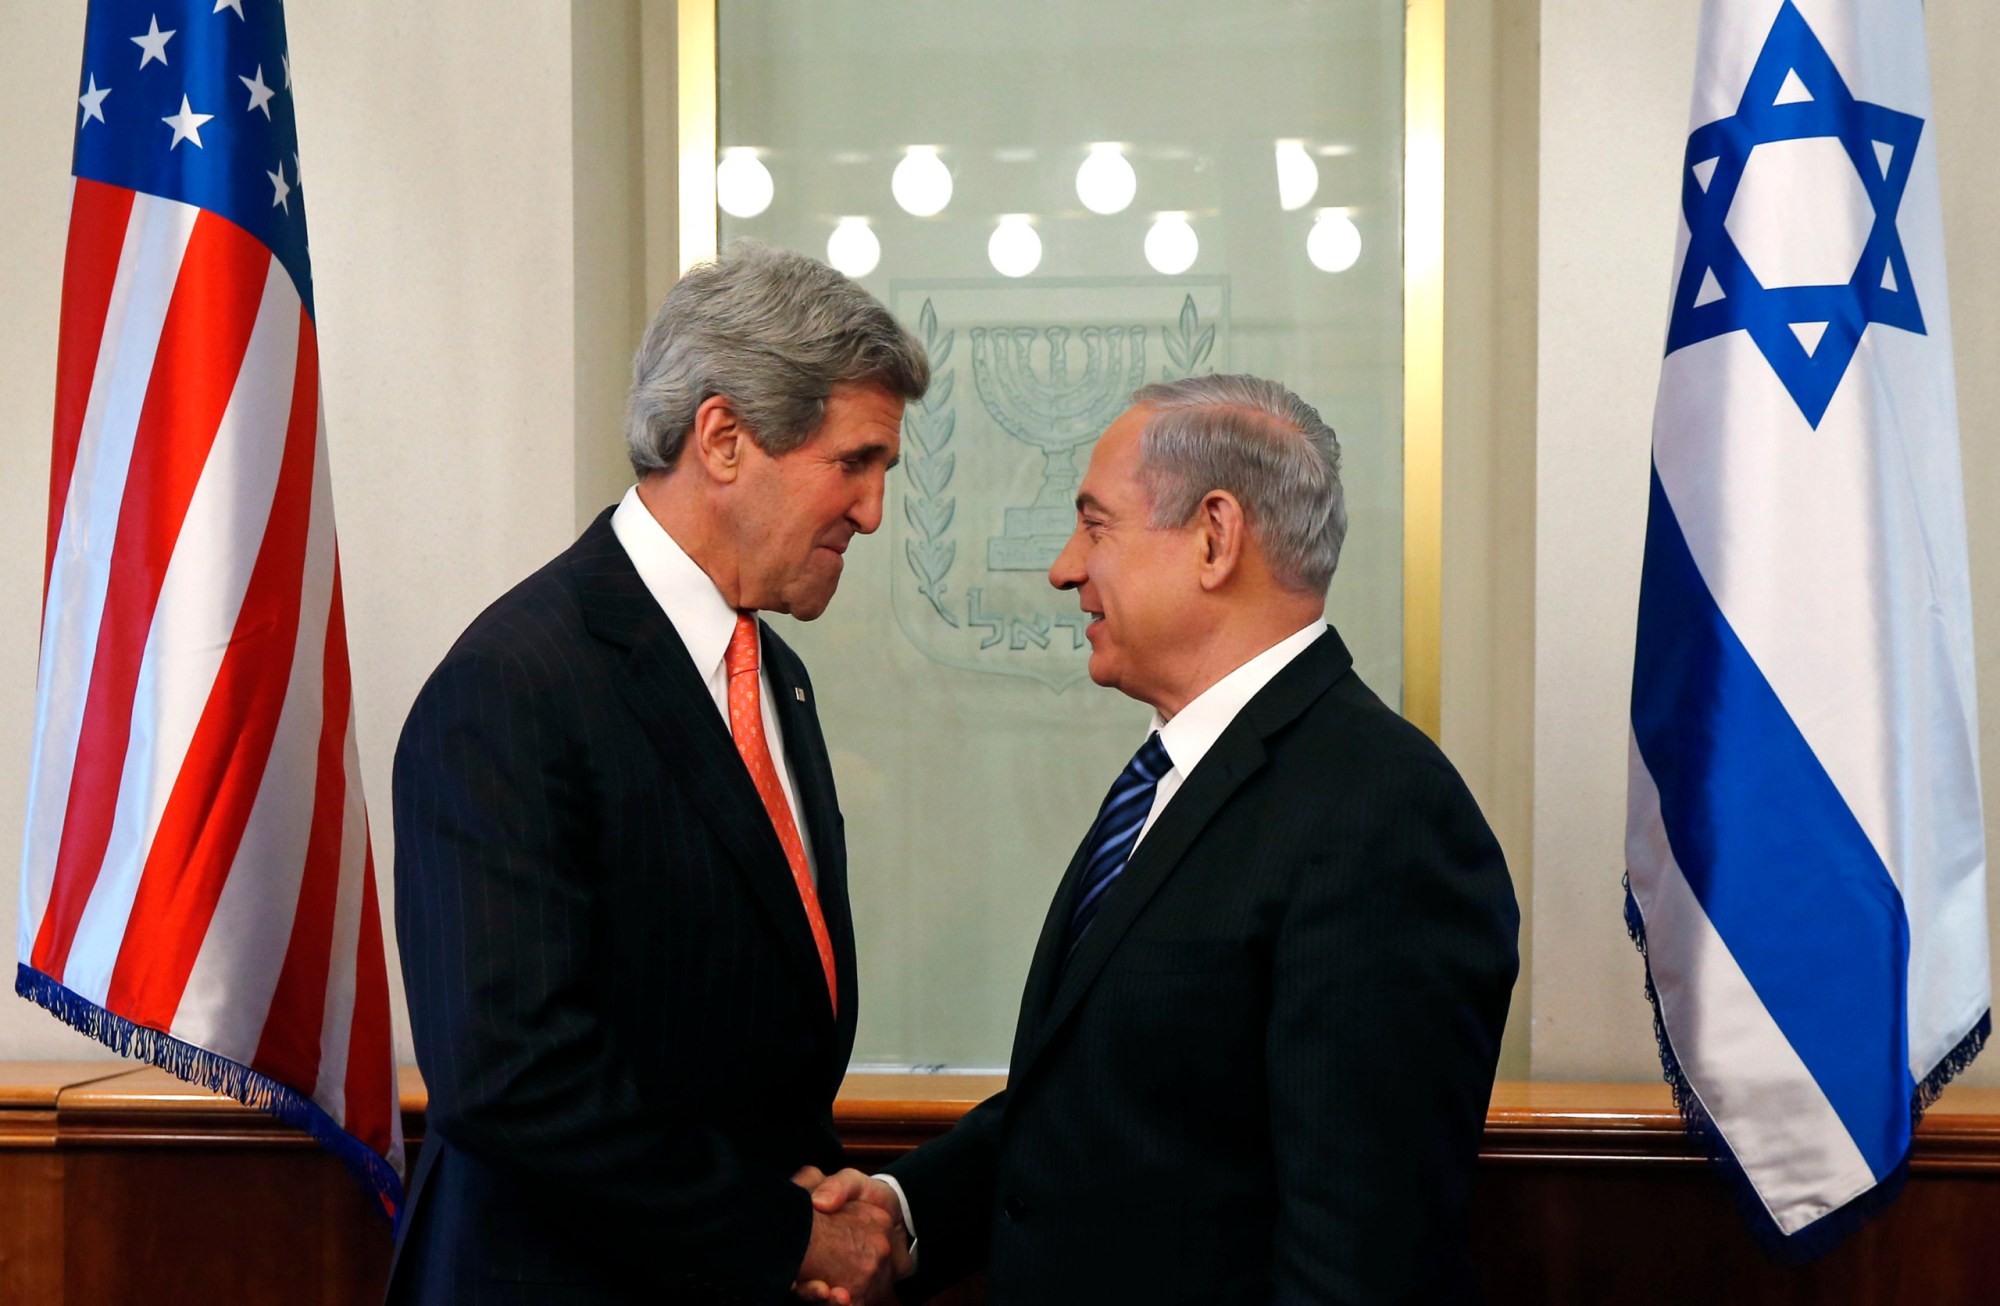 U.S. Secretary of State John Kerry meets with Israeli Prime Minster Benjamin Netanyahu in Jerusalem to discuss a restart of the Middle East peace process after more than four years of hardly any talks. (AP/Jim Young)